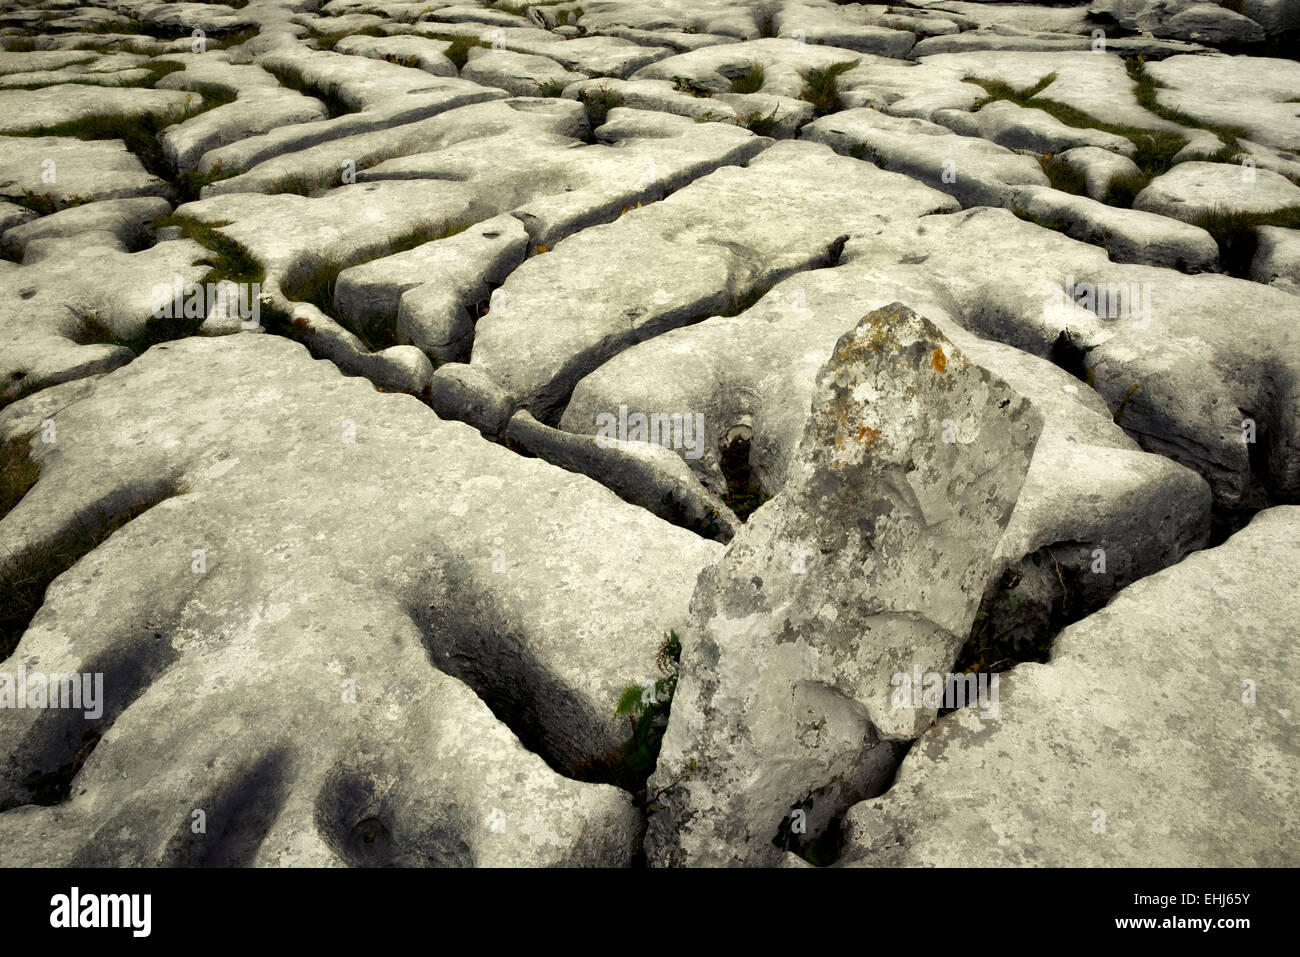 Karst rock formation near the Megalithic tomb called Poulnabrone. The Burren, Ireland Stock Photo